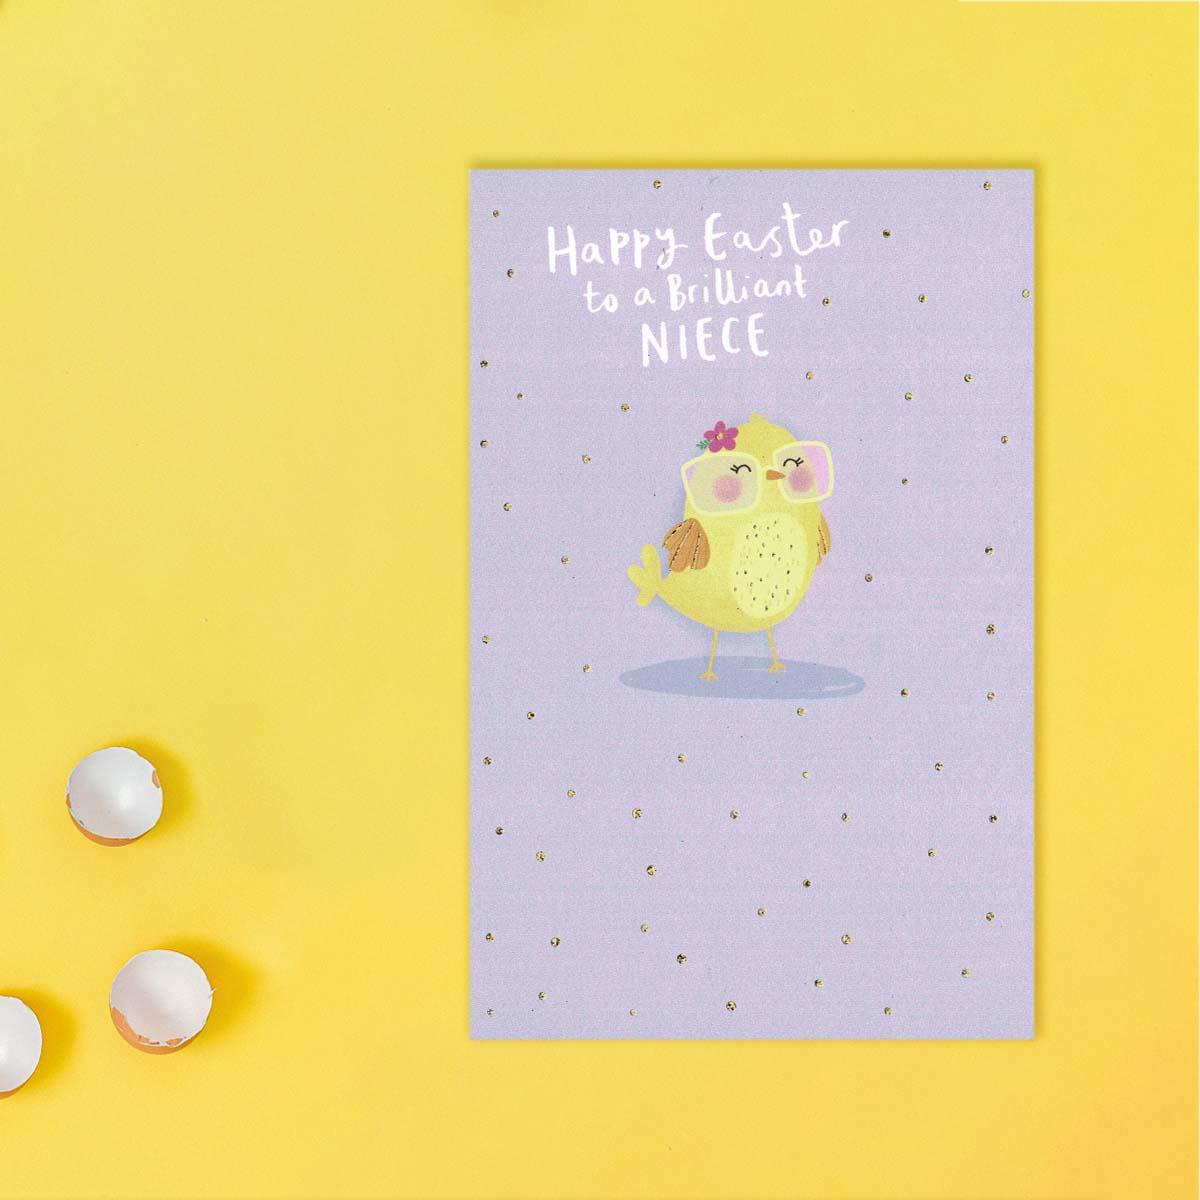 Happy Easter Brilliant Niece Card Front Image